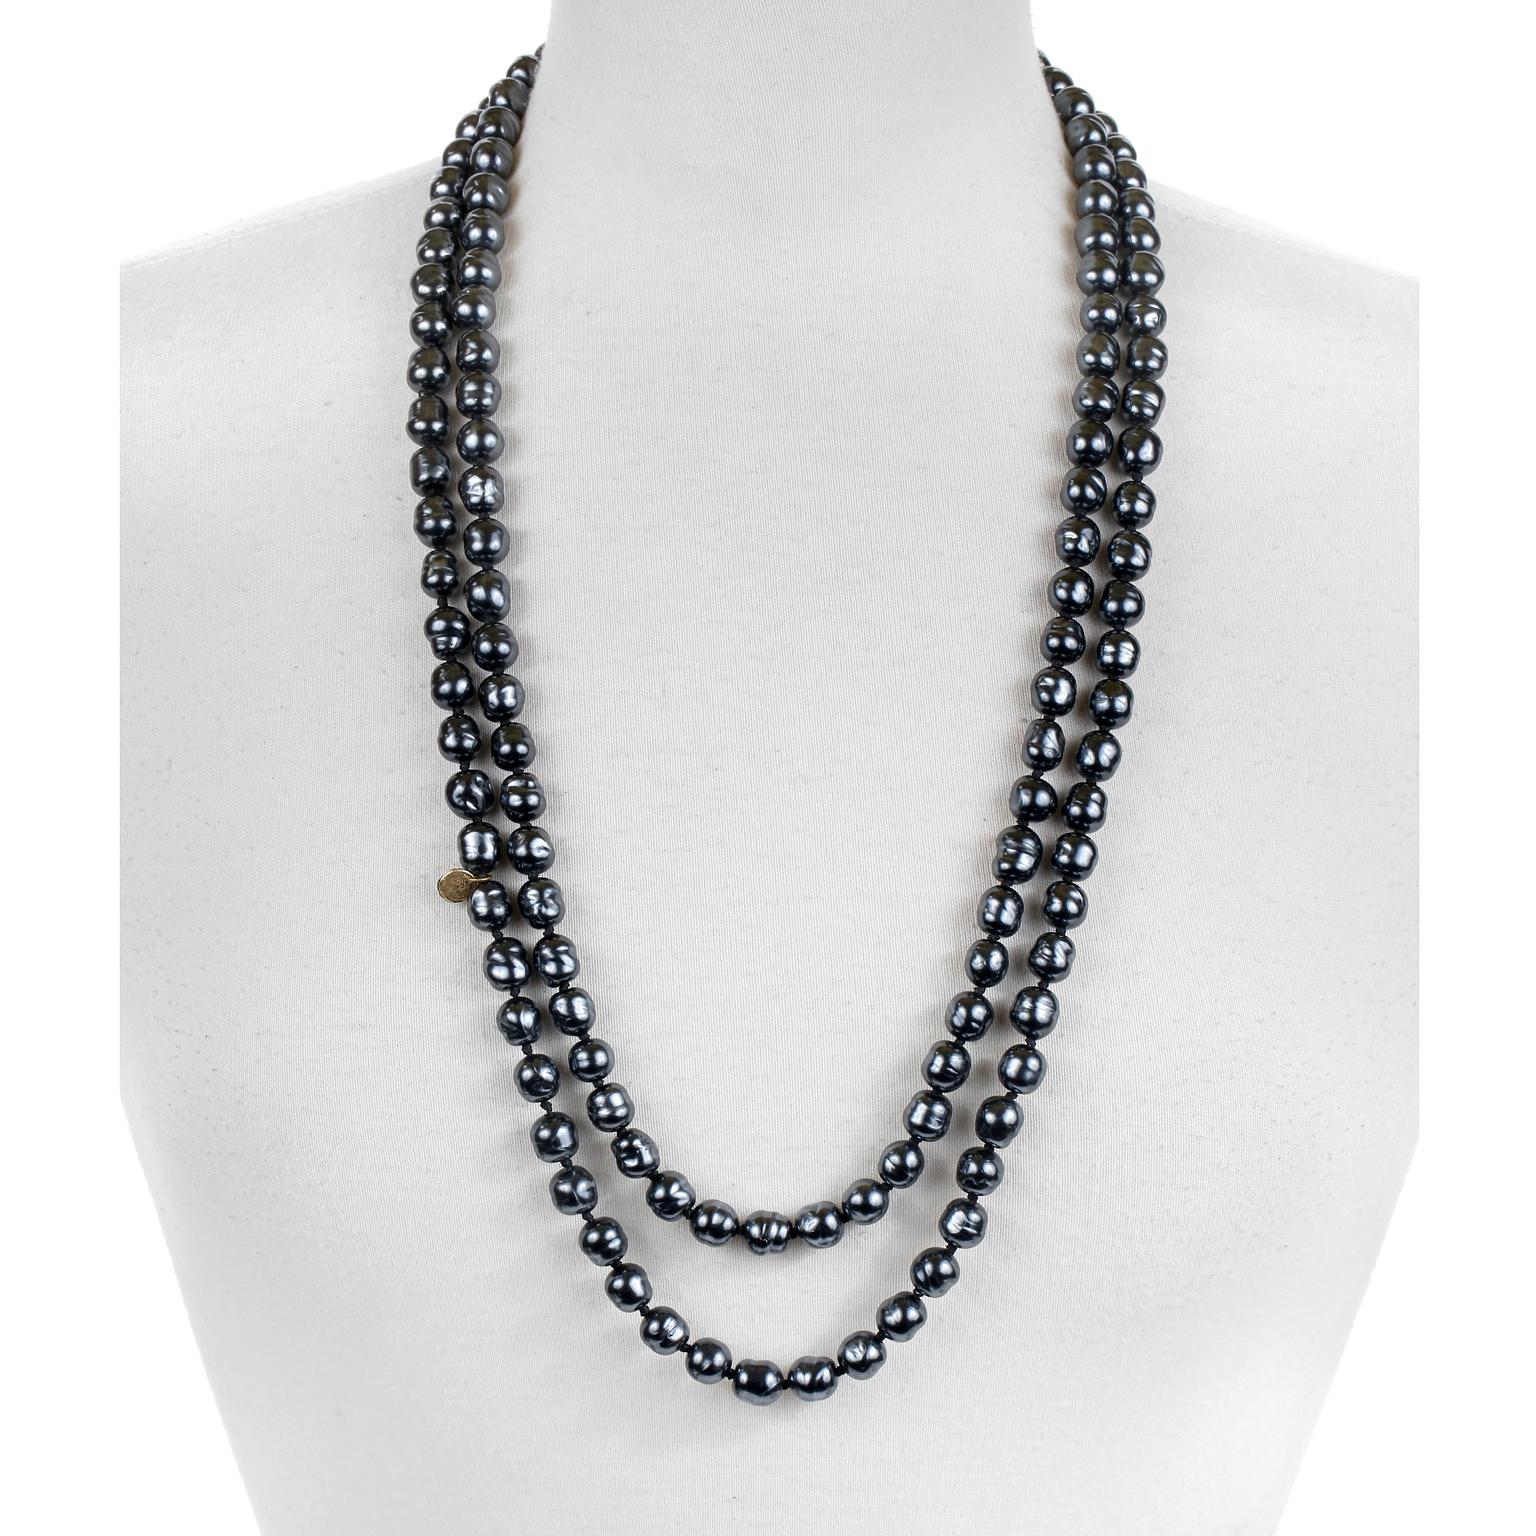 Women's or Men's Chanel Grey Pearl Necklace